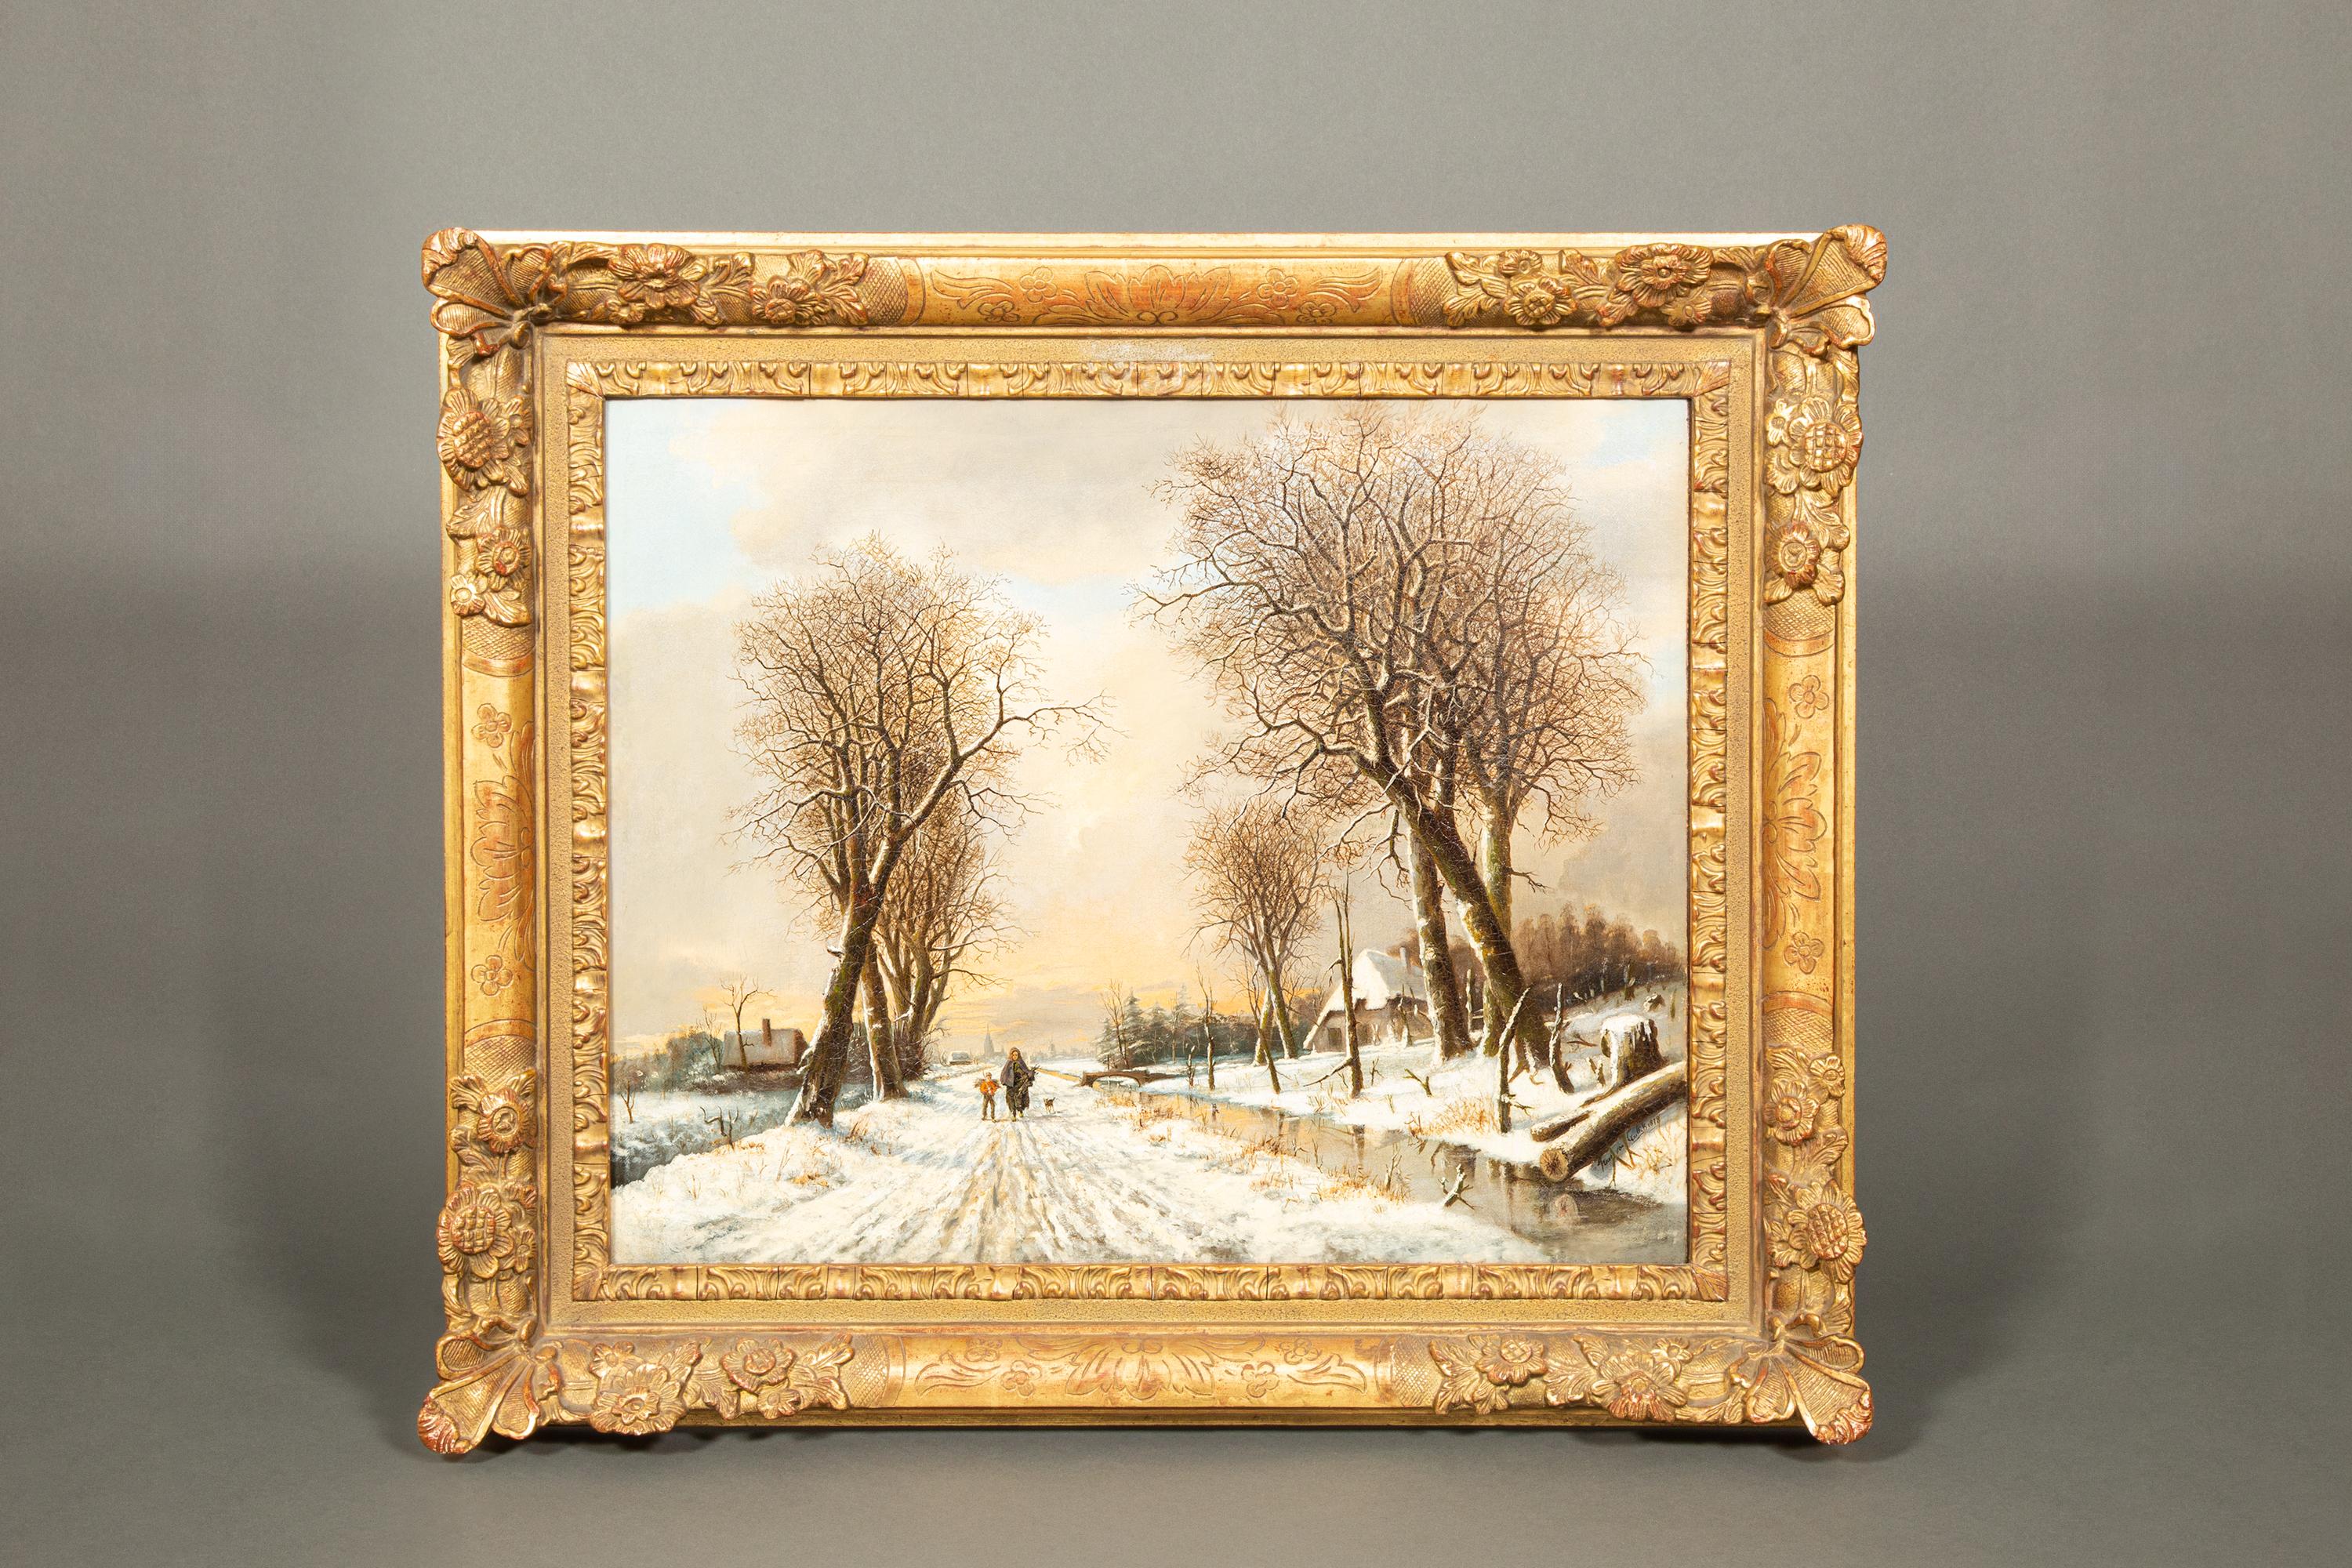 'A Walk along the Snowy Landscape’ by Franciscus Lodewijk Van Gulik, dated 1878 For Sale 8